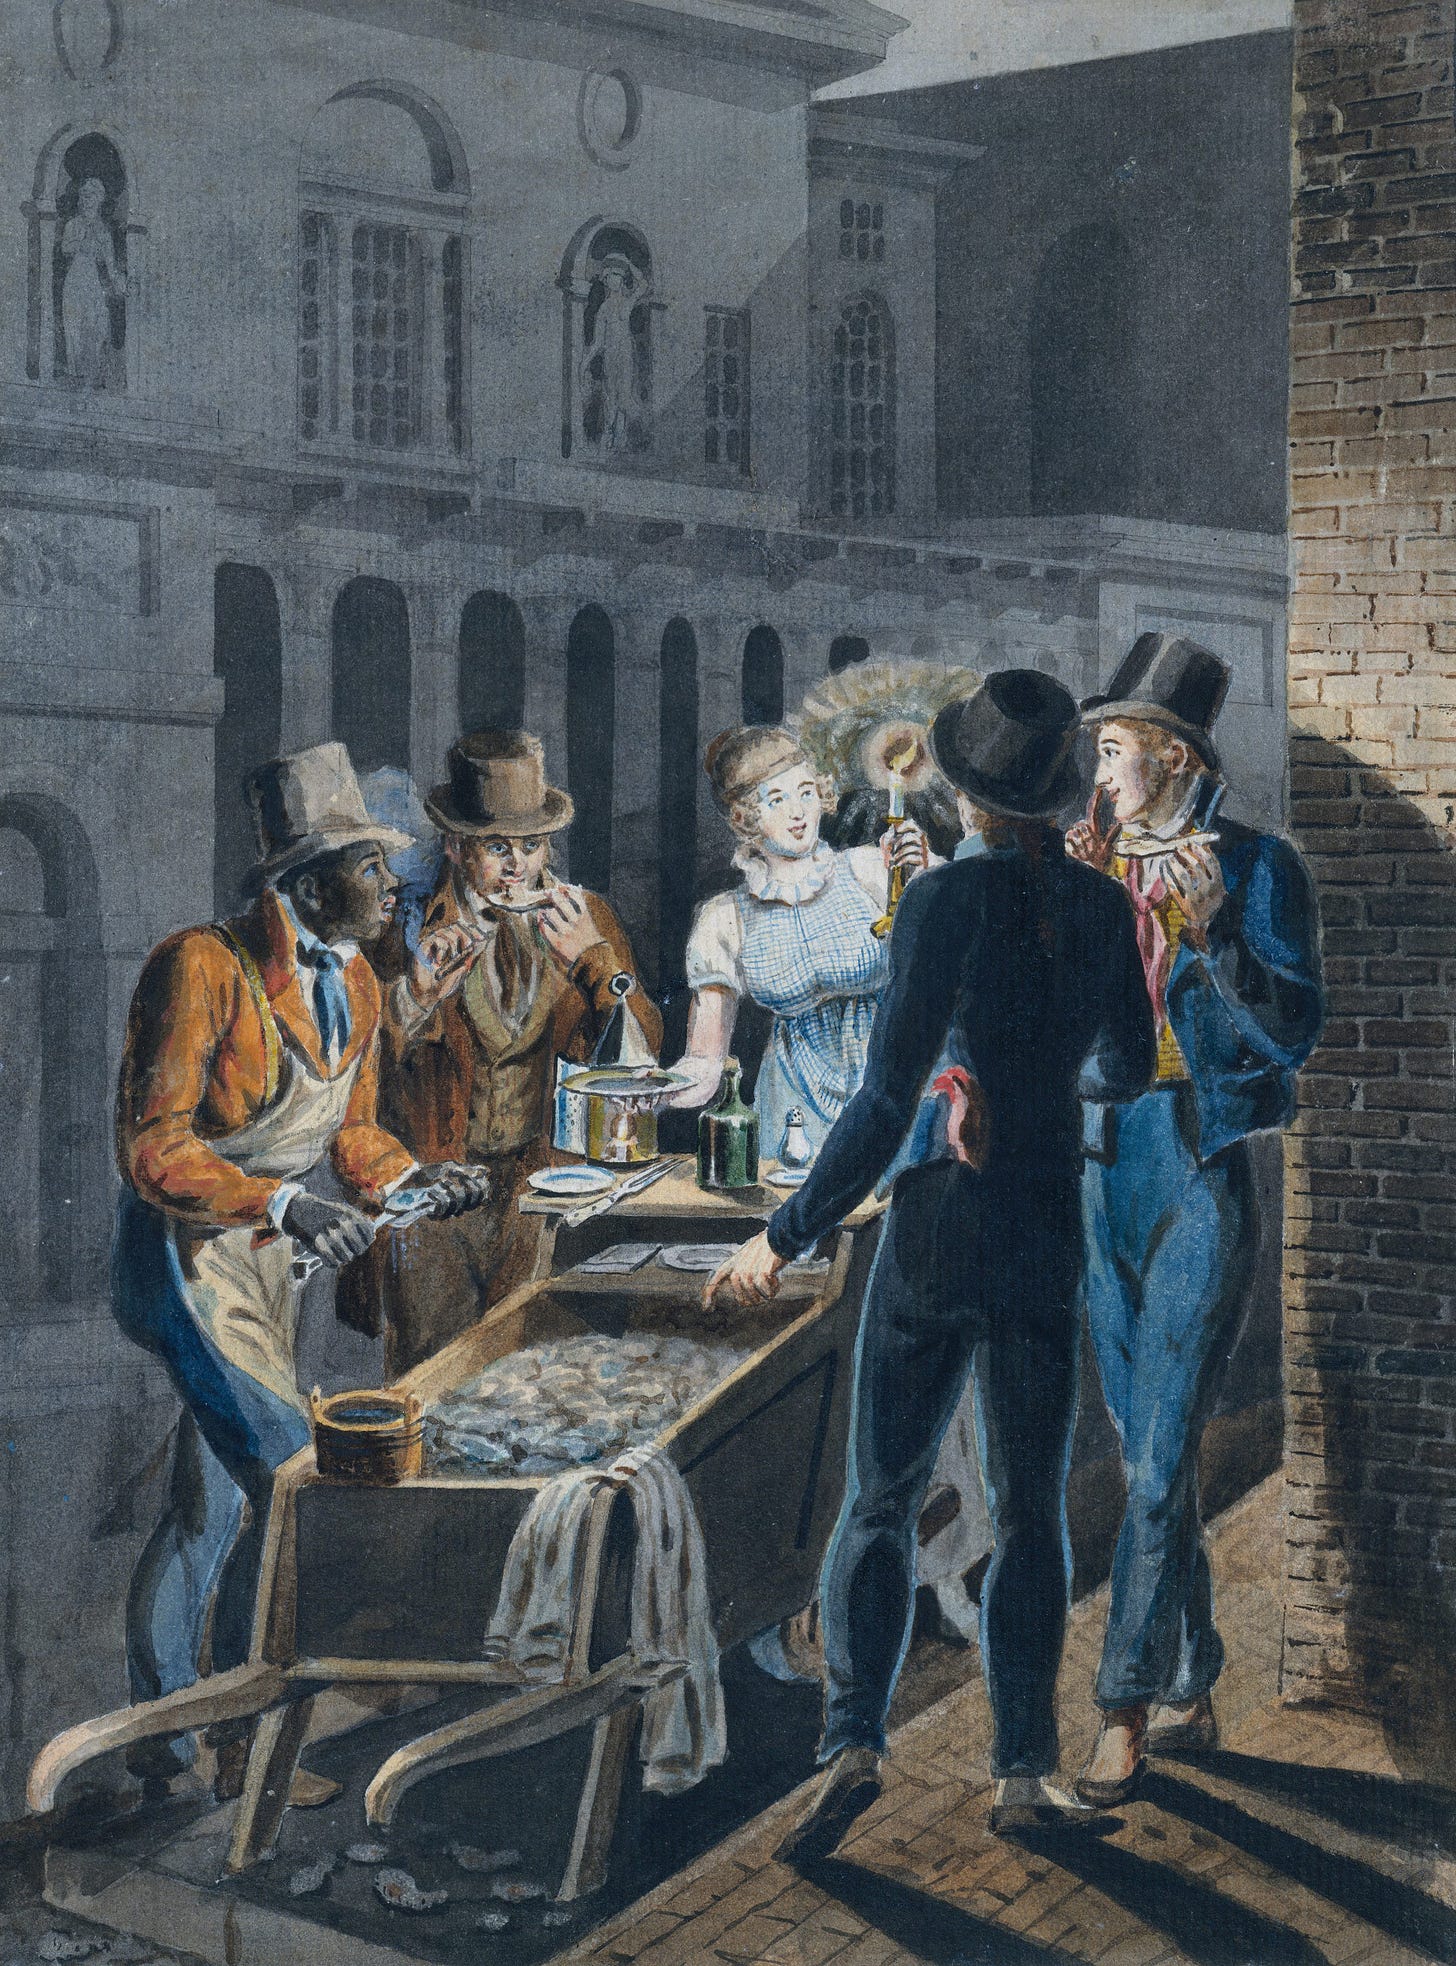 This nightlife scene in Philadelphia, attributed to the painter John Lewis Krimmel (1786-1821), shows people gathered around an oyster barrow. 